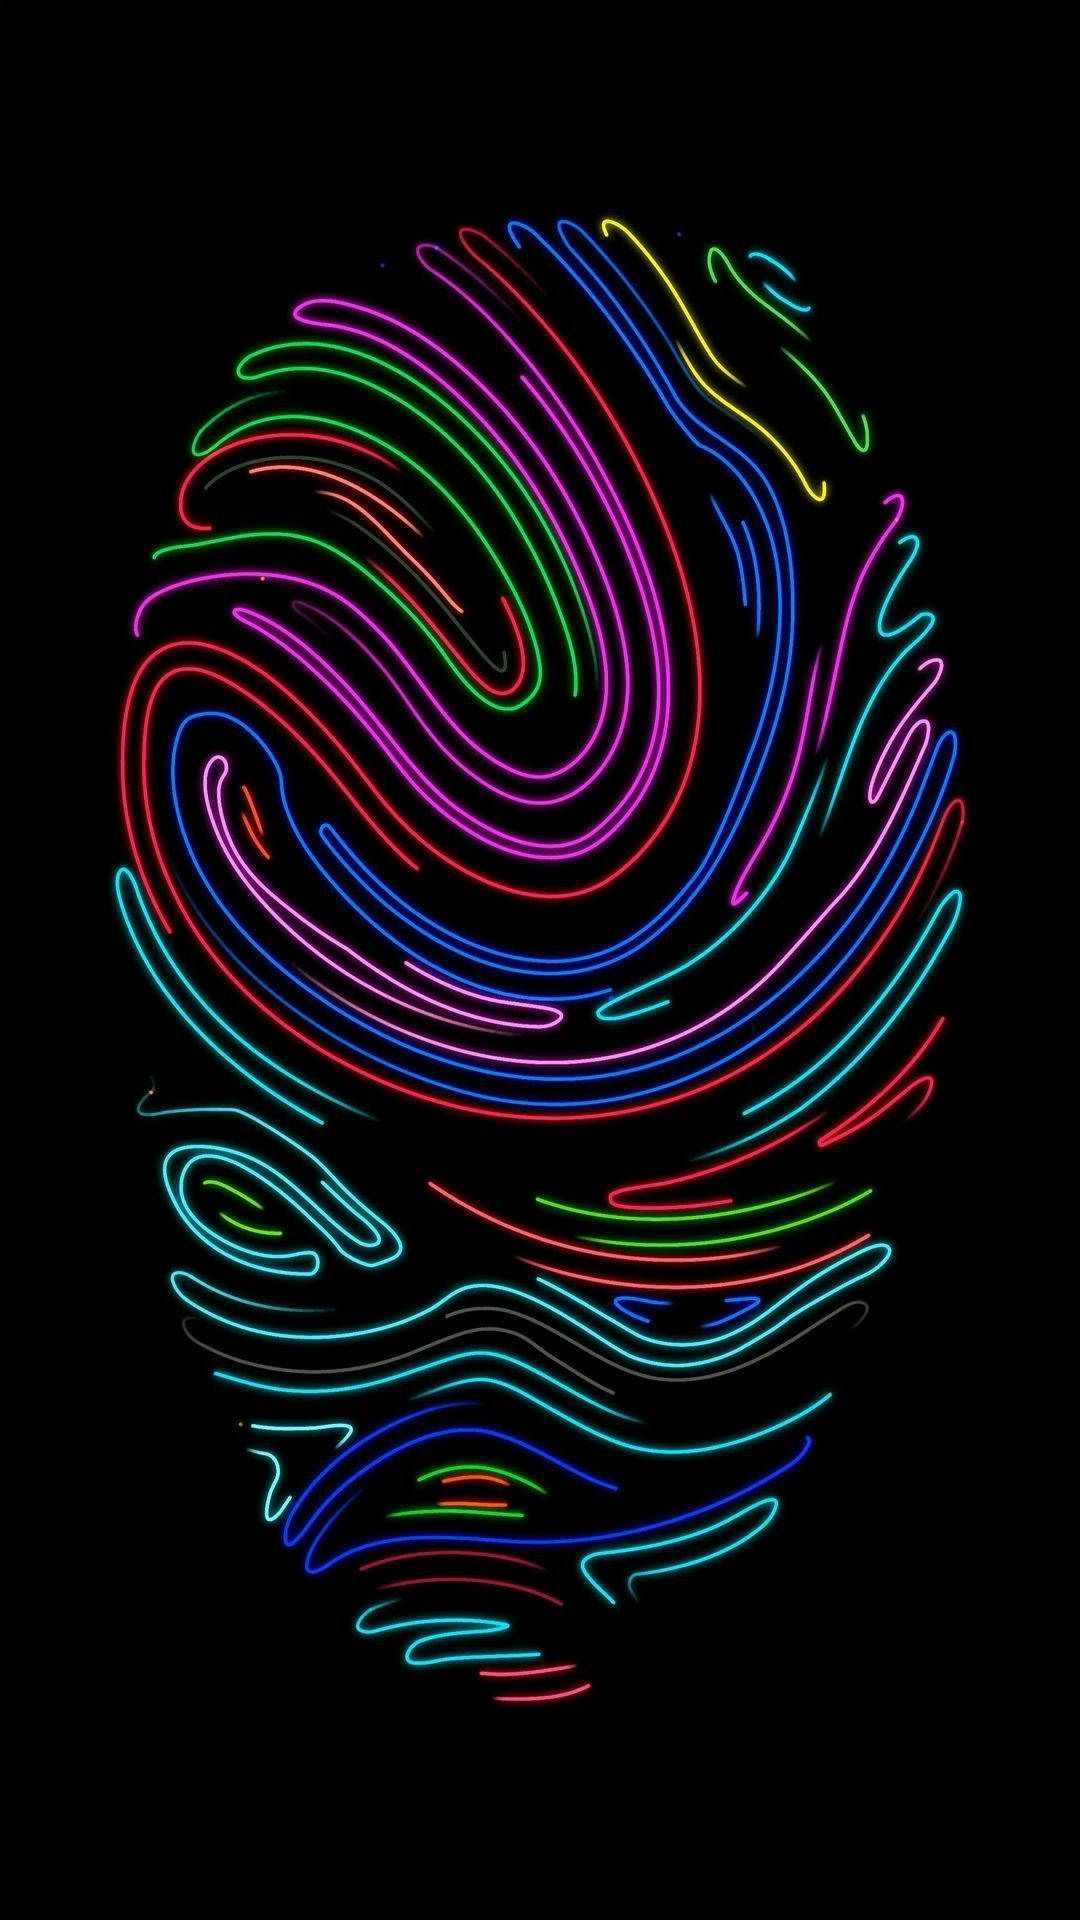 100+] Iphone Live Wallpapers For Free | Wallpapers.Com